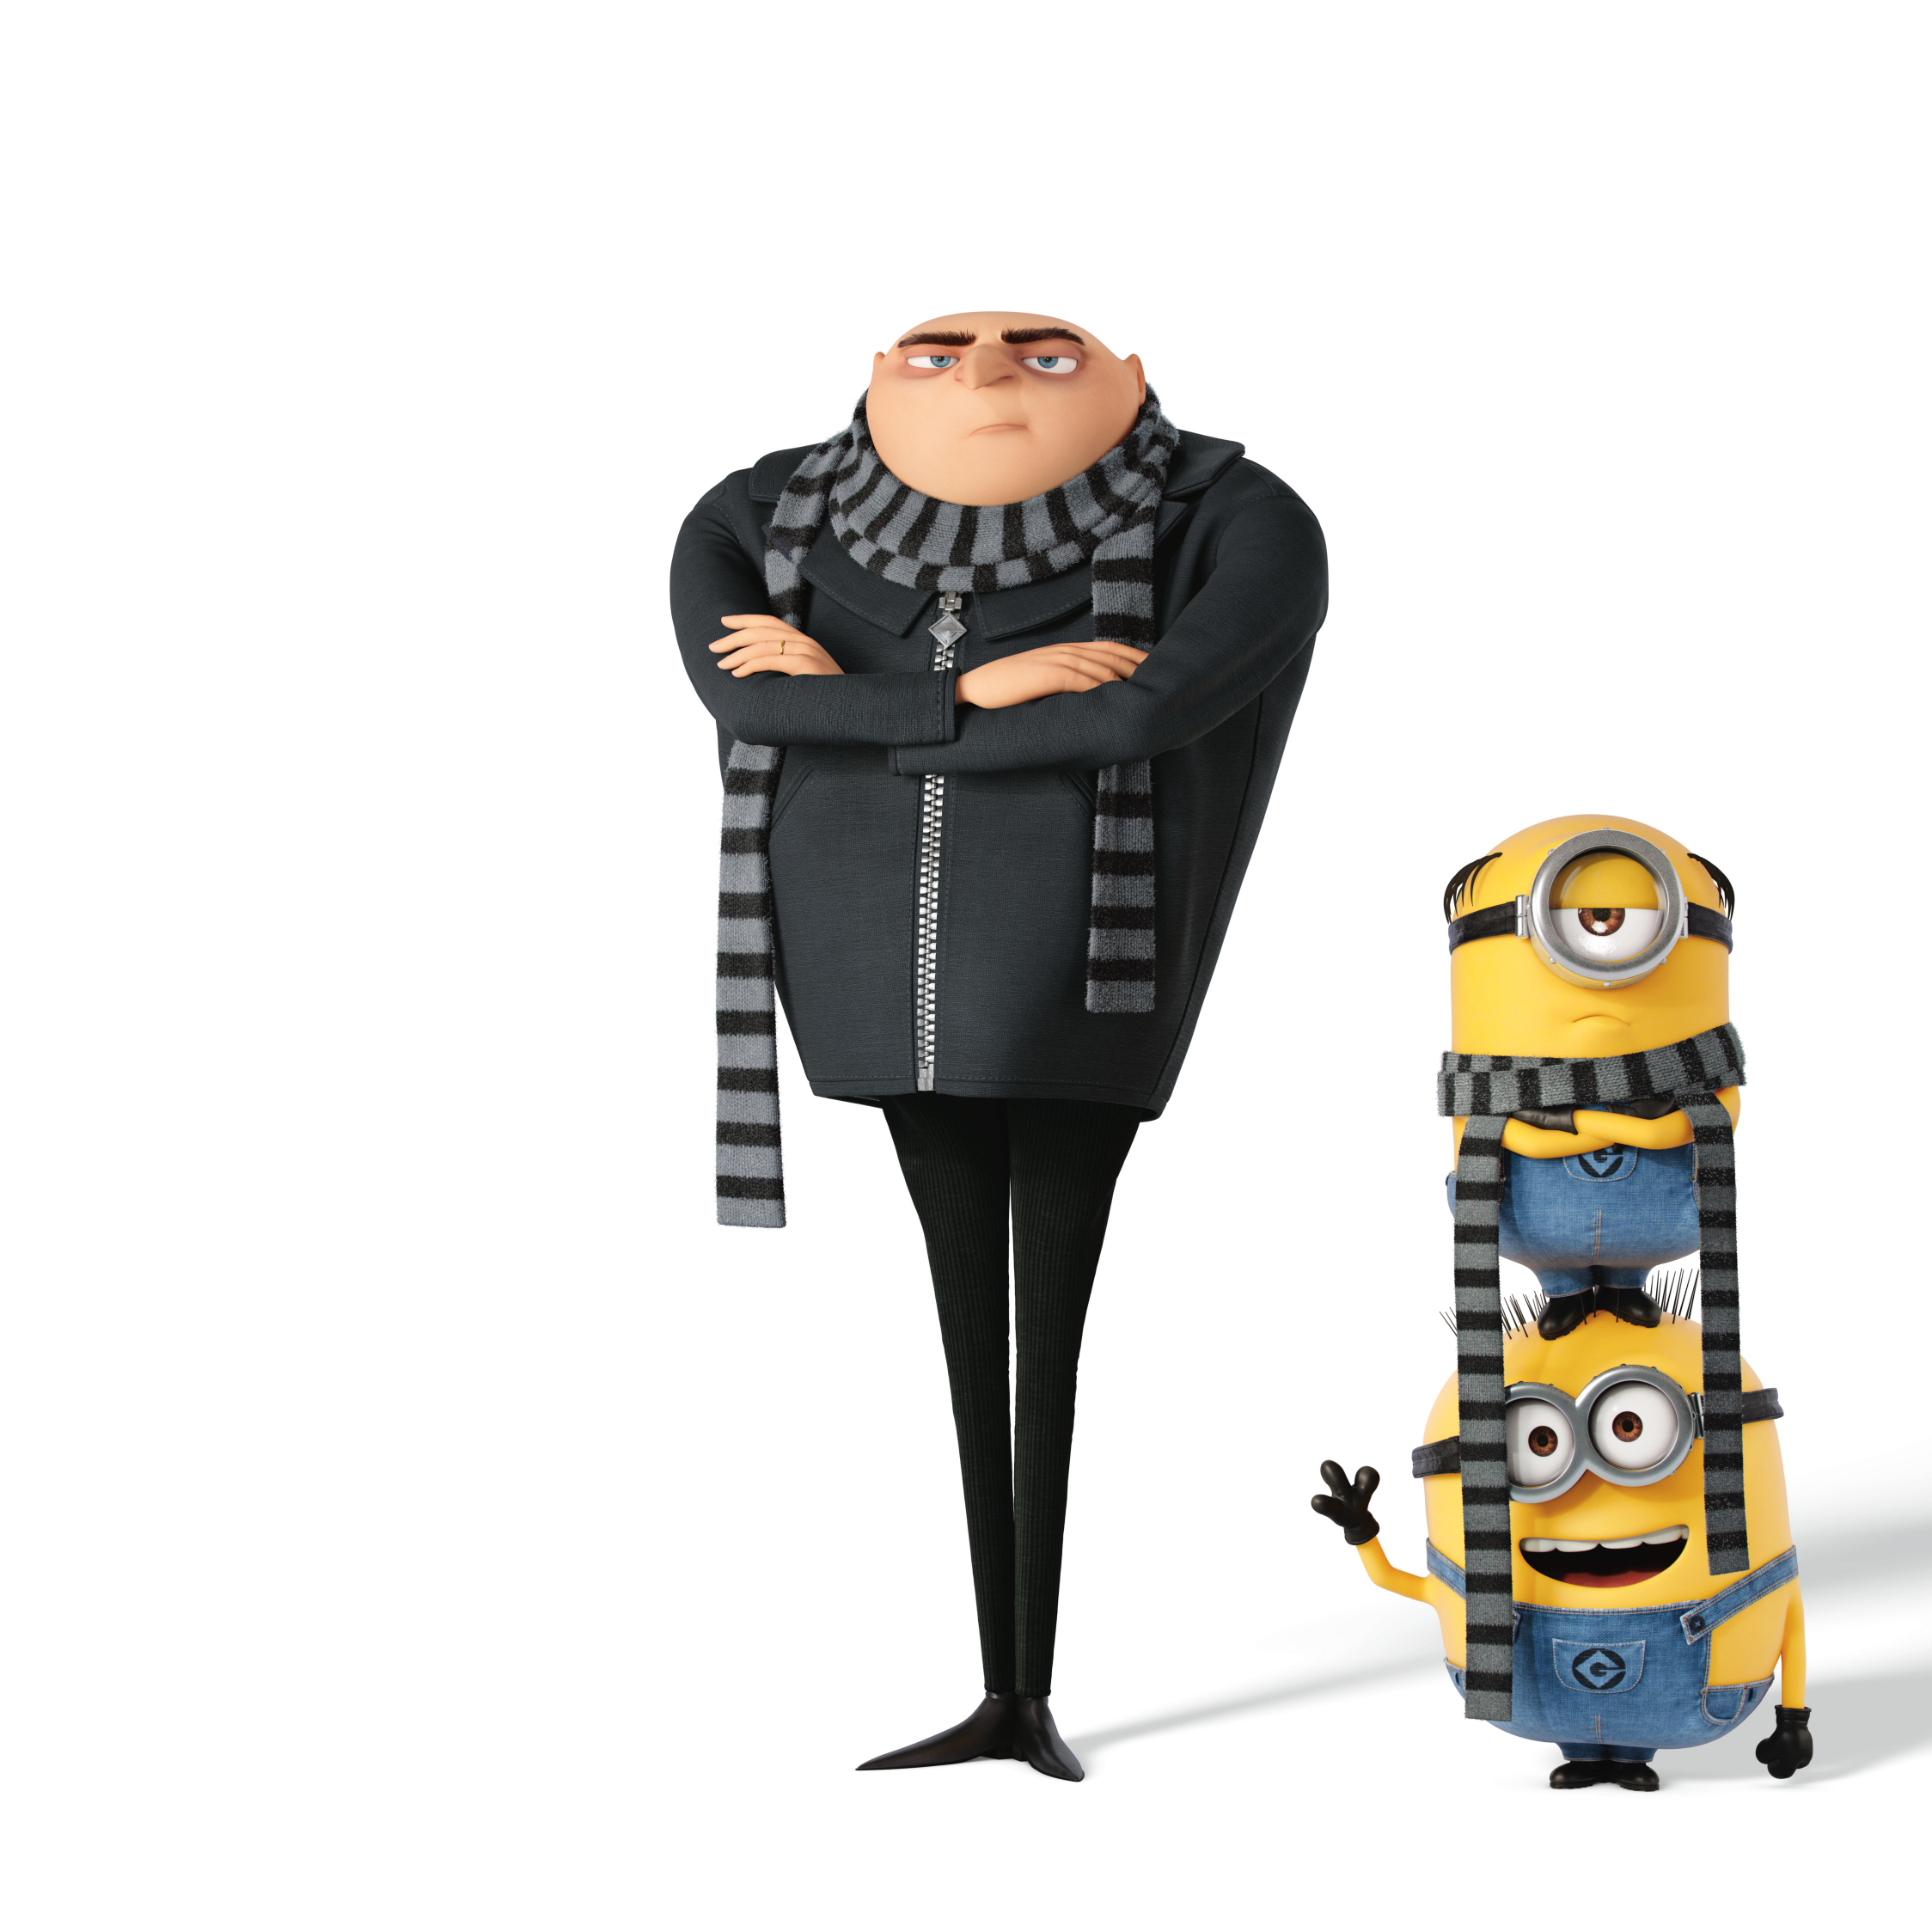 Pictures of vector from despicable me 🔥 Despicable me, Despi